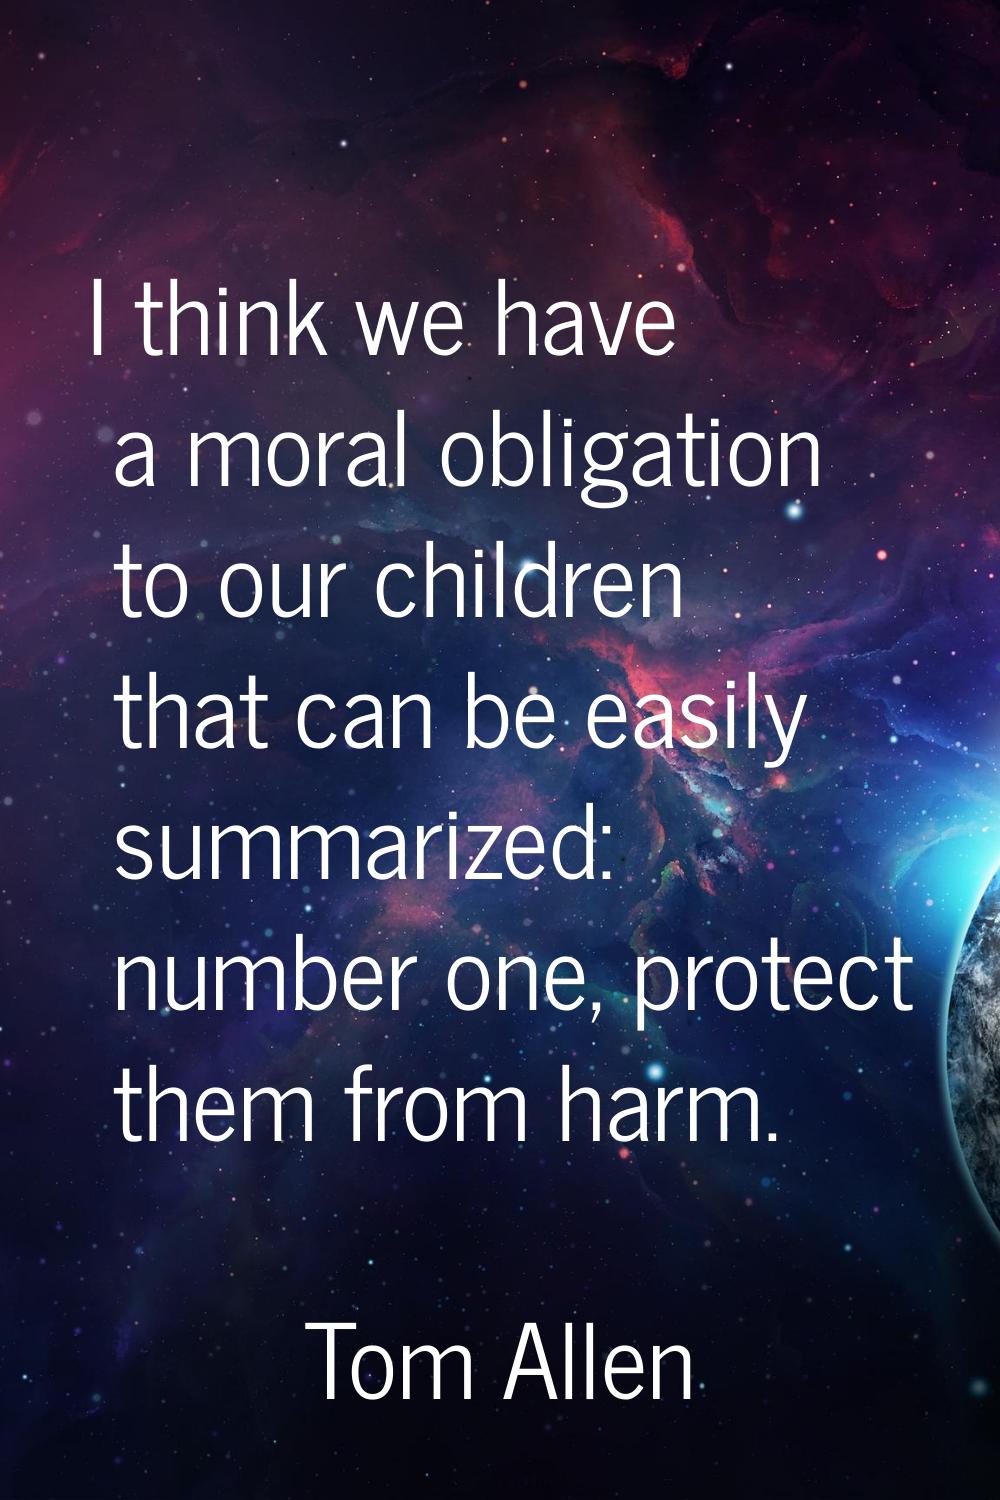 I think we have a moral obligation to our children that can be easily summarized: number one, prote